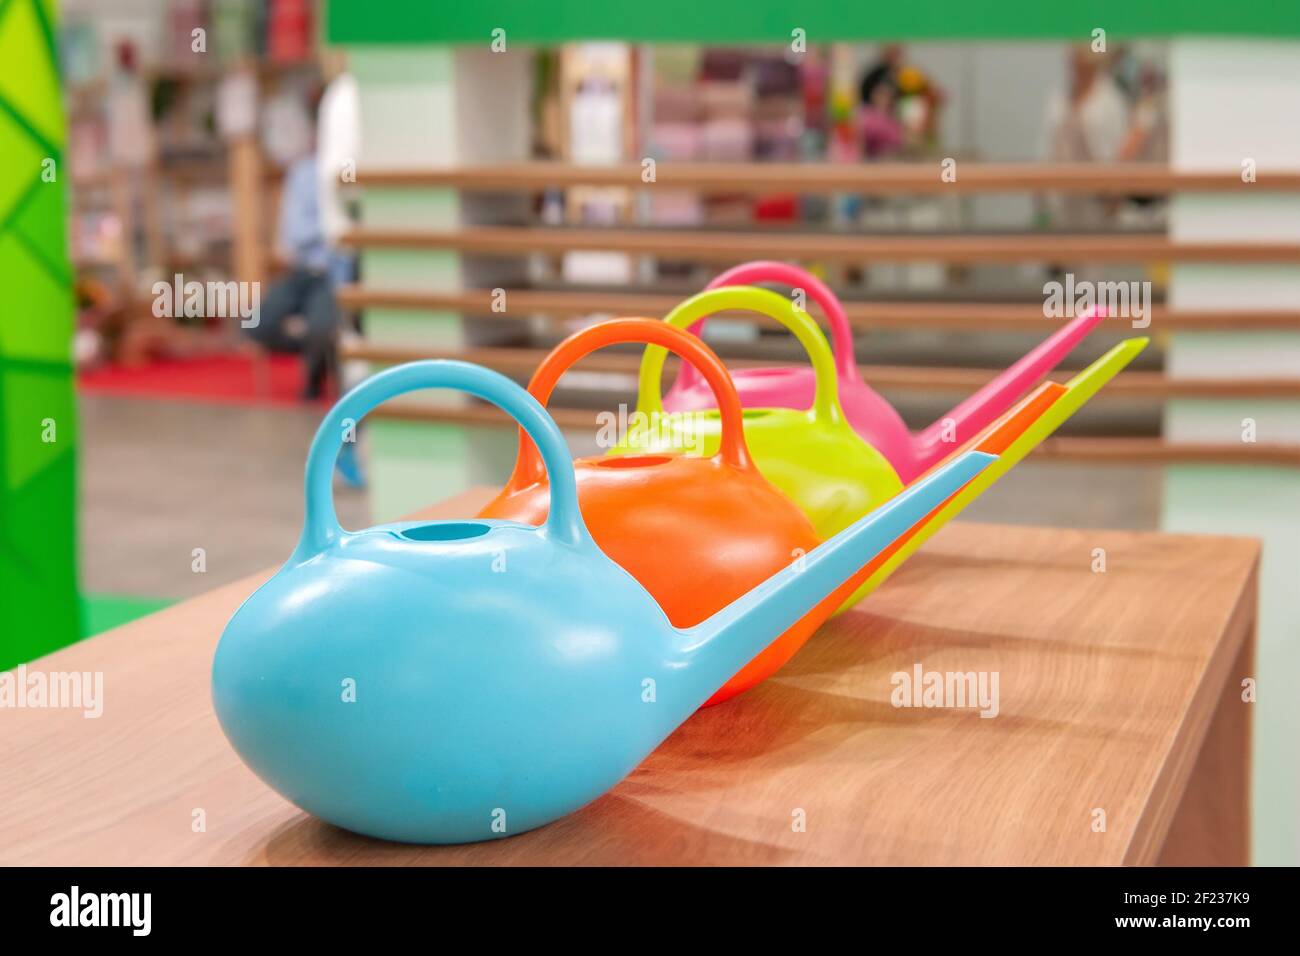 Garden watering cans for sale in a hardware store on a retail shelf. concept of care for indoor and garden plants. Stock Photo